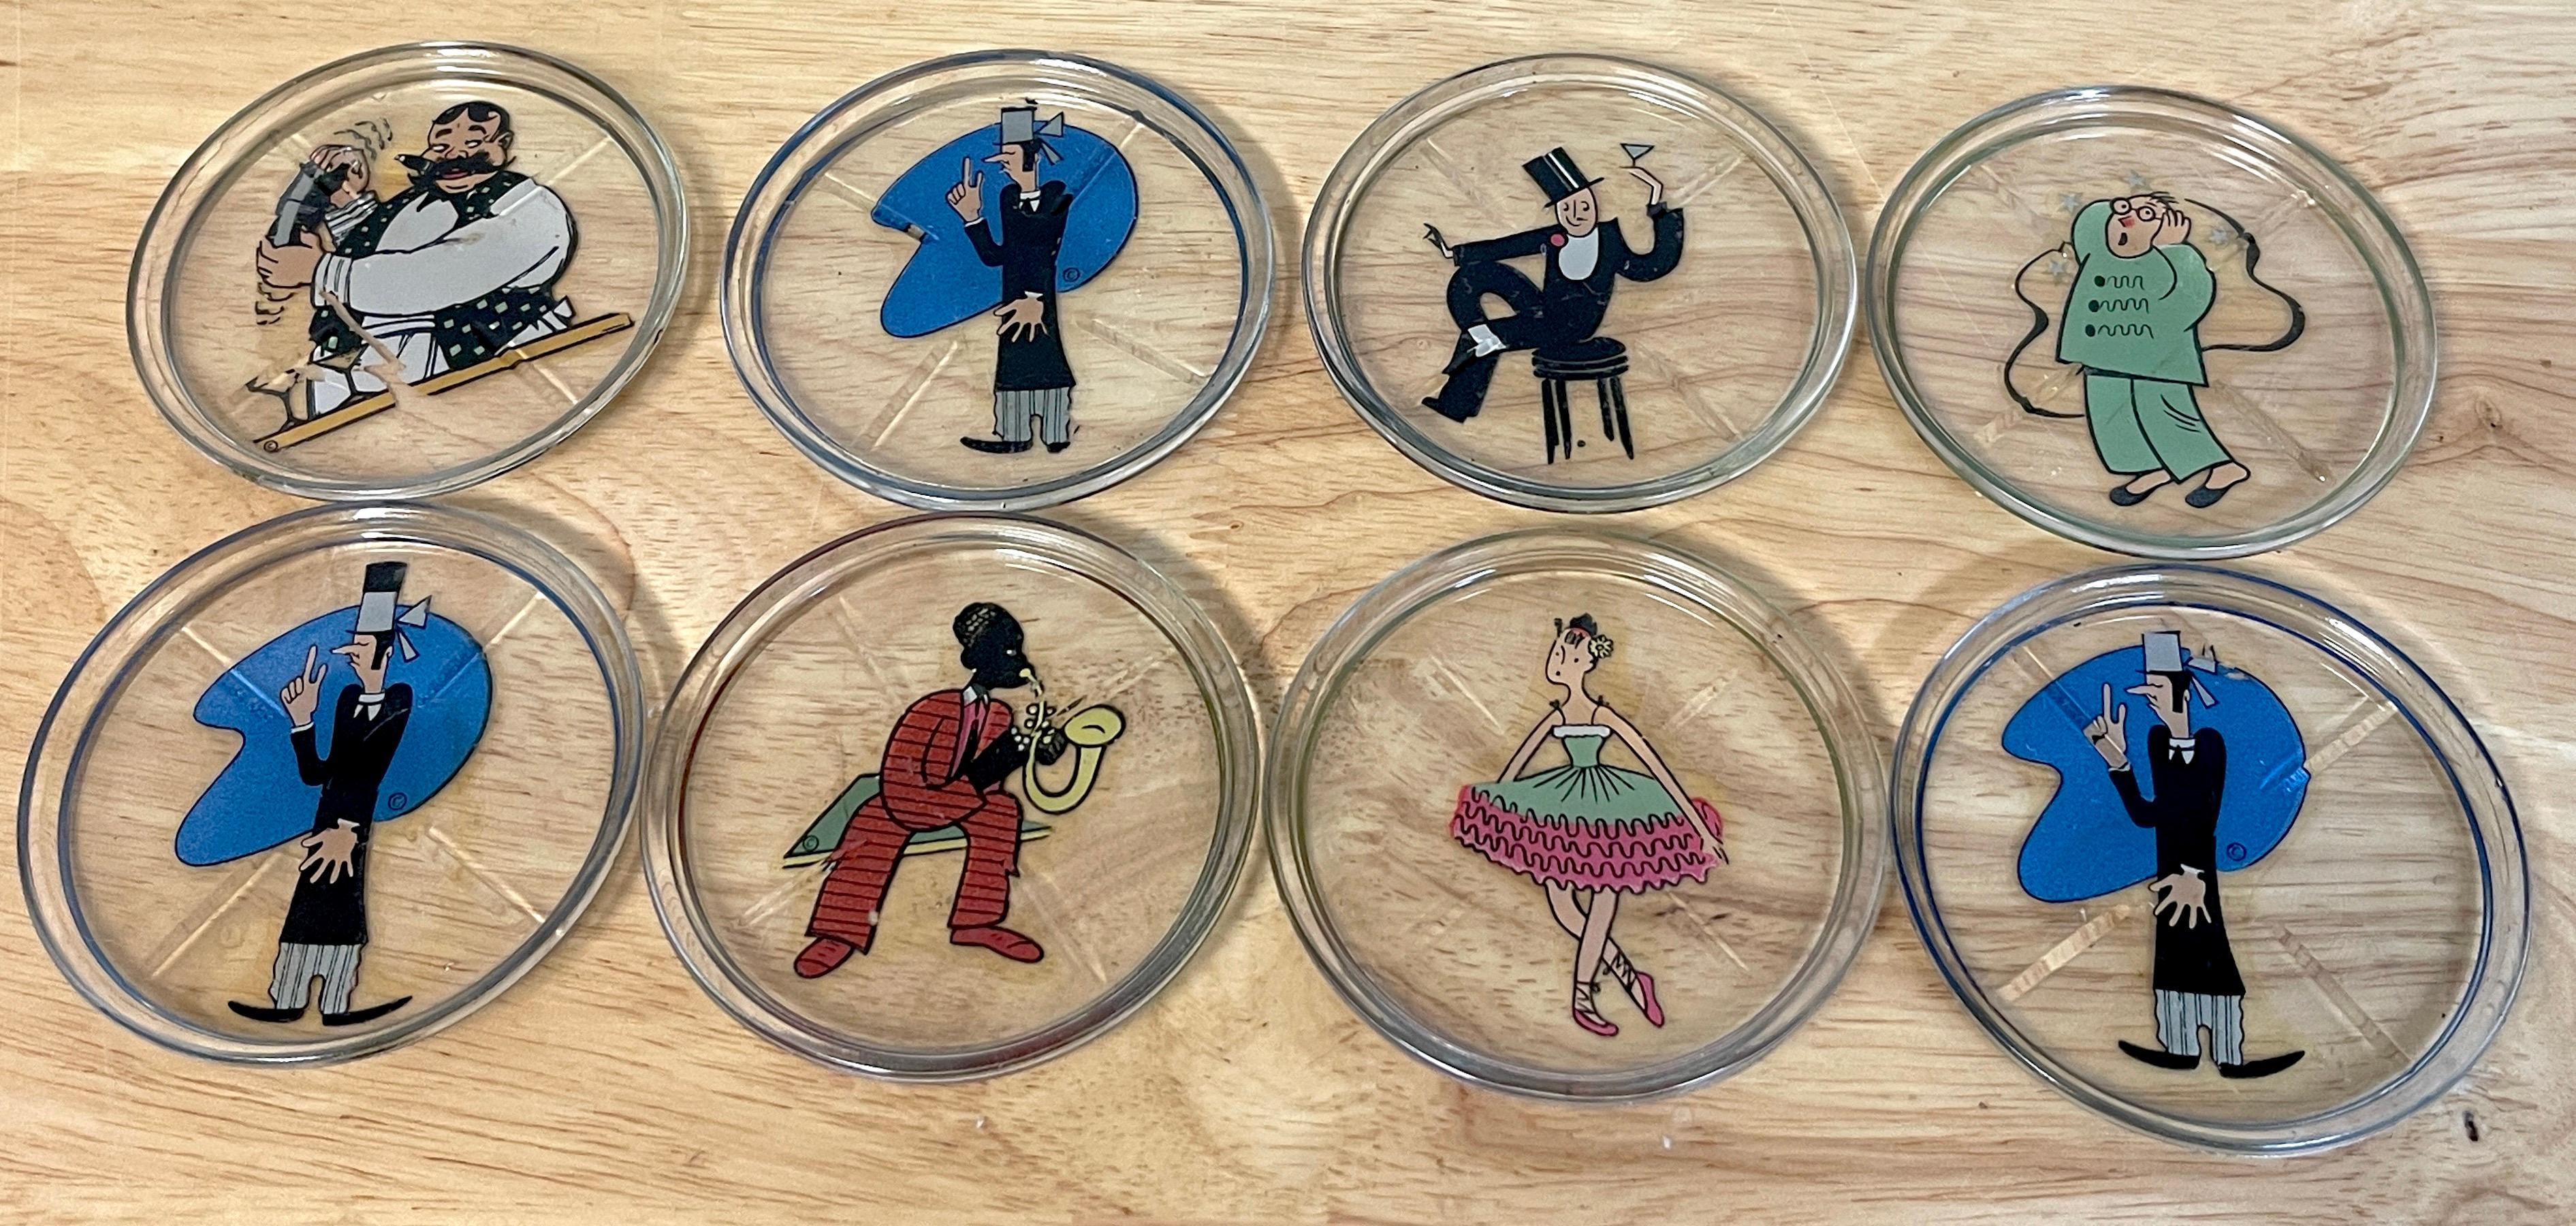 8 Art Deco whimsical caricature glass coasters, each one with a colorful portrait, five different vignettes, one a sleuth style portrait is repeated three times, see the last photo for all the designs. Stackable. 
Each coaster has a 3.25 diameter,